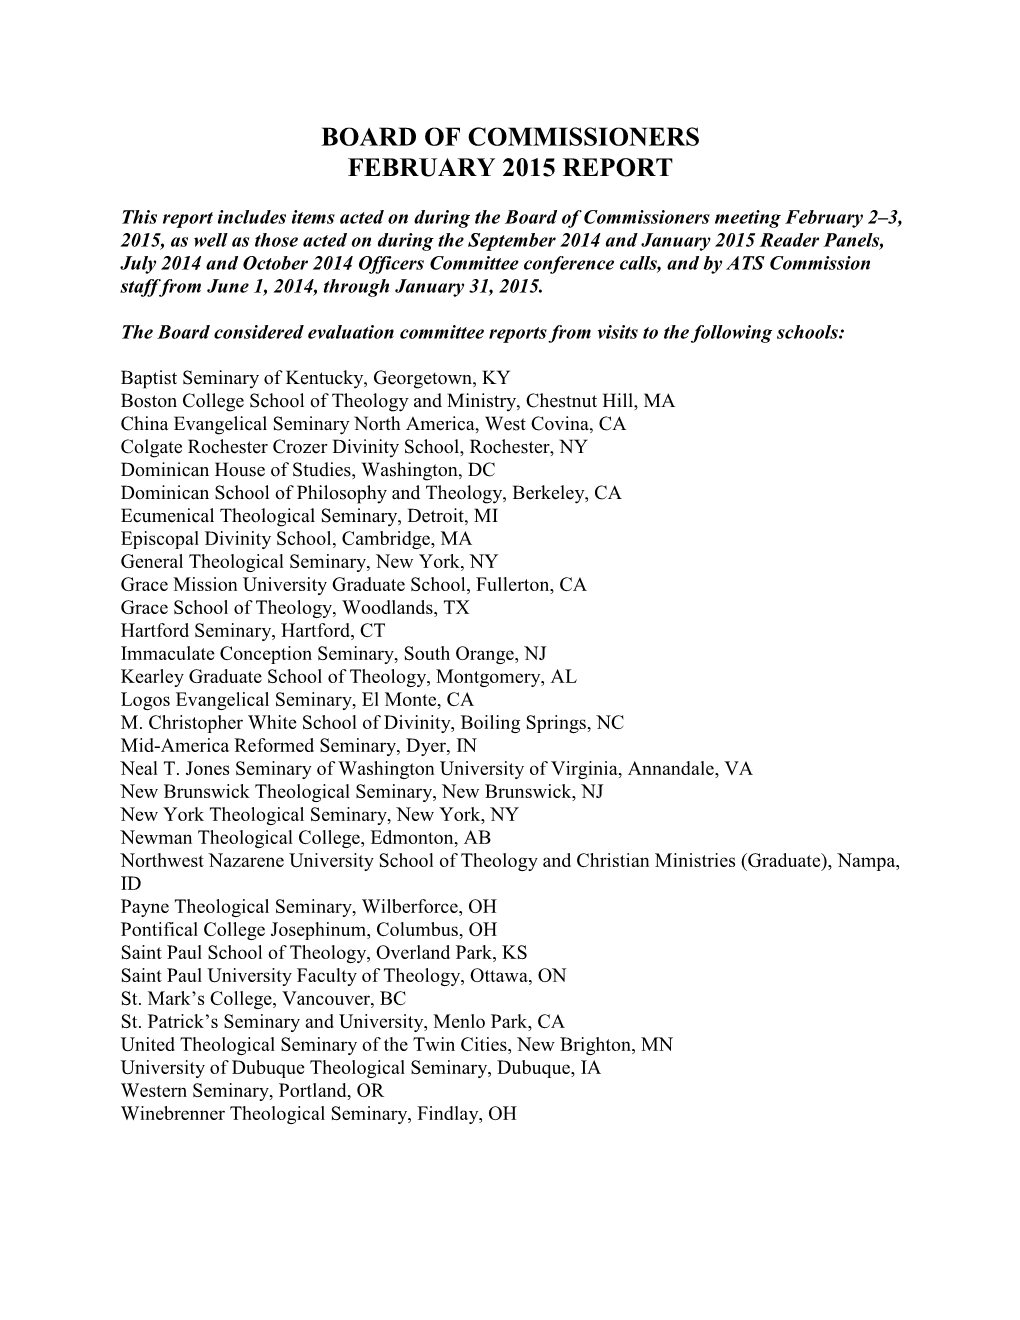 Board of Commissioners February 2015 Report